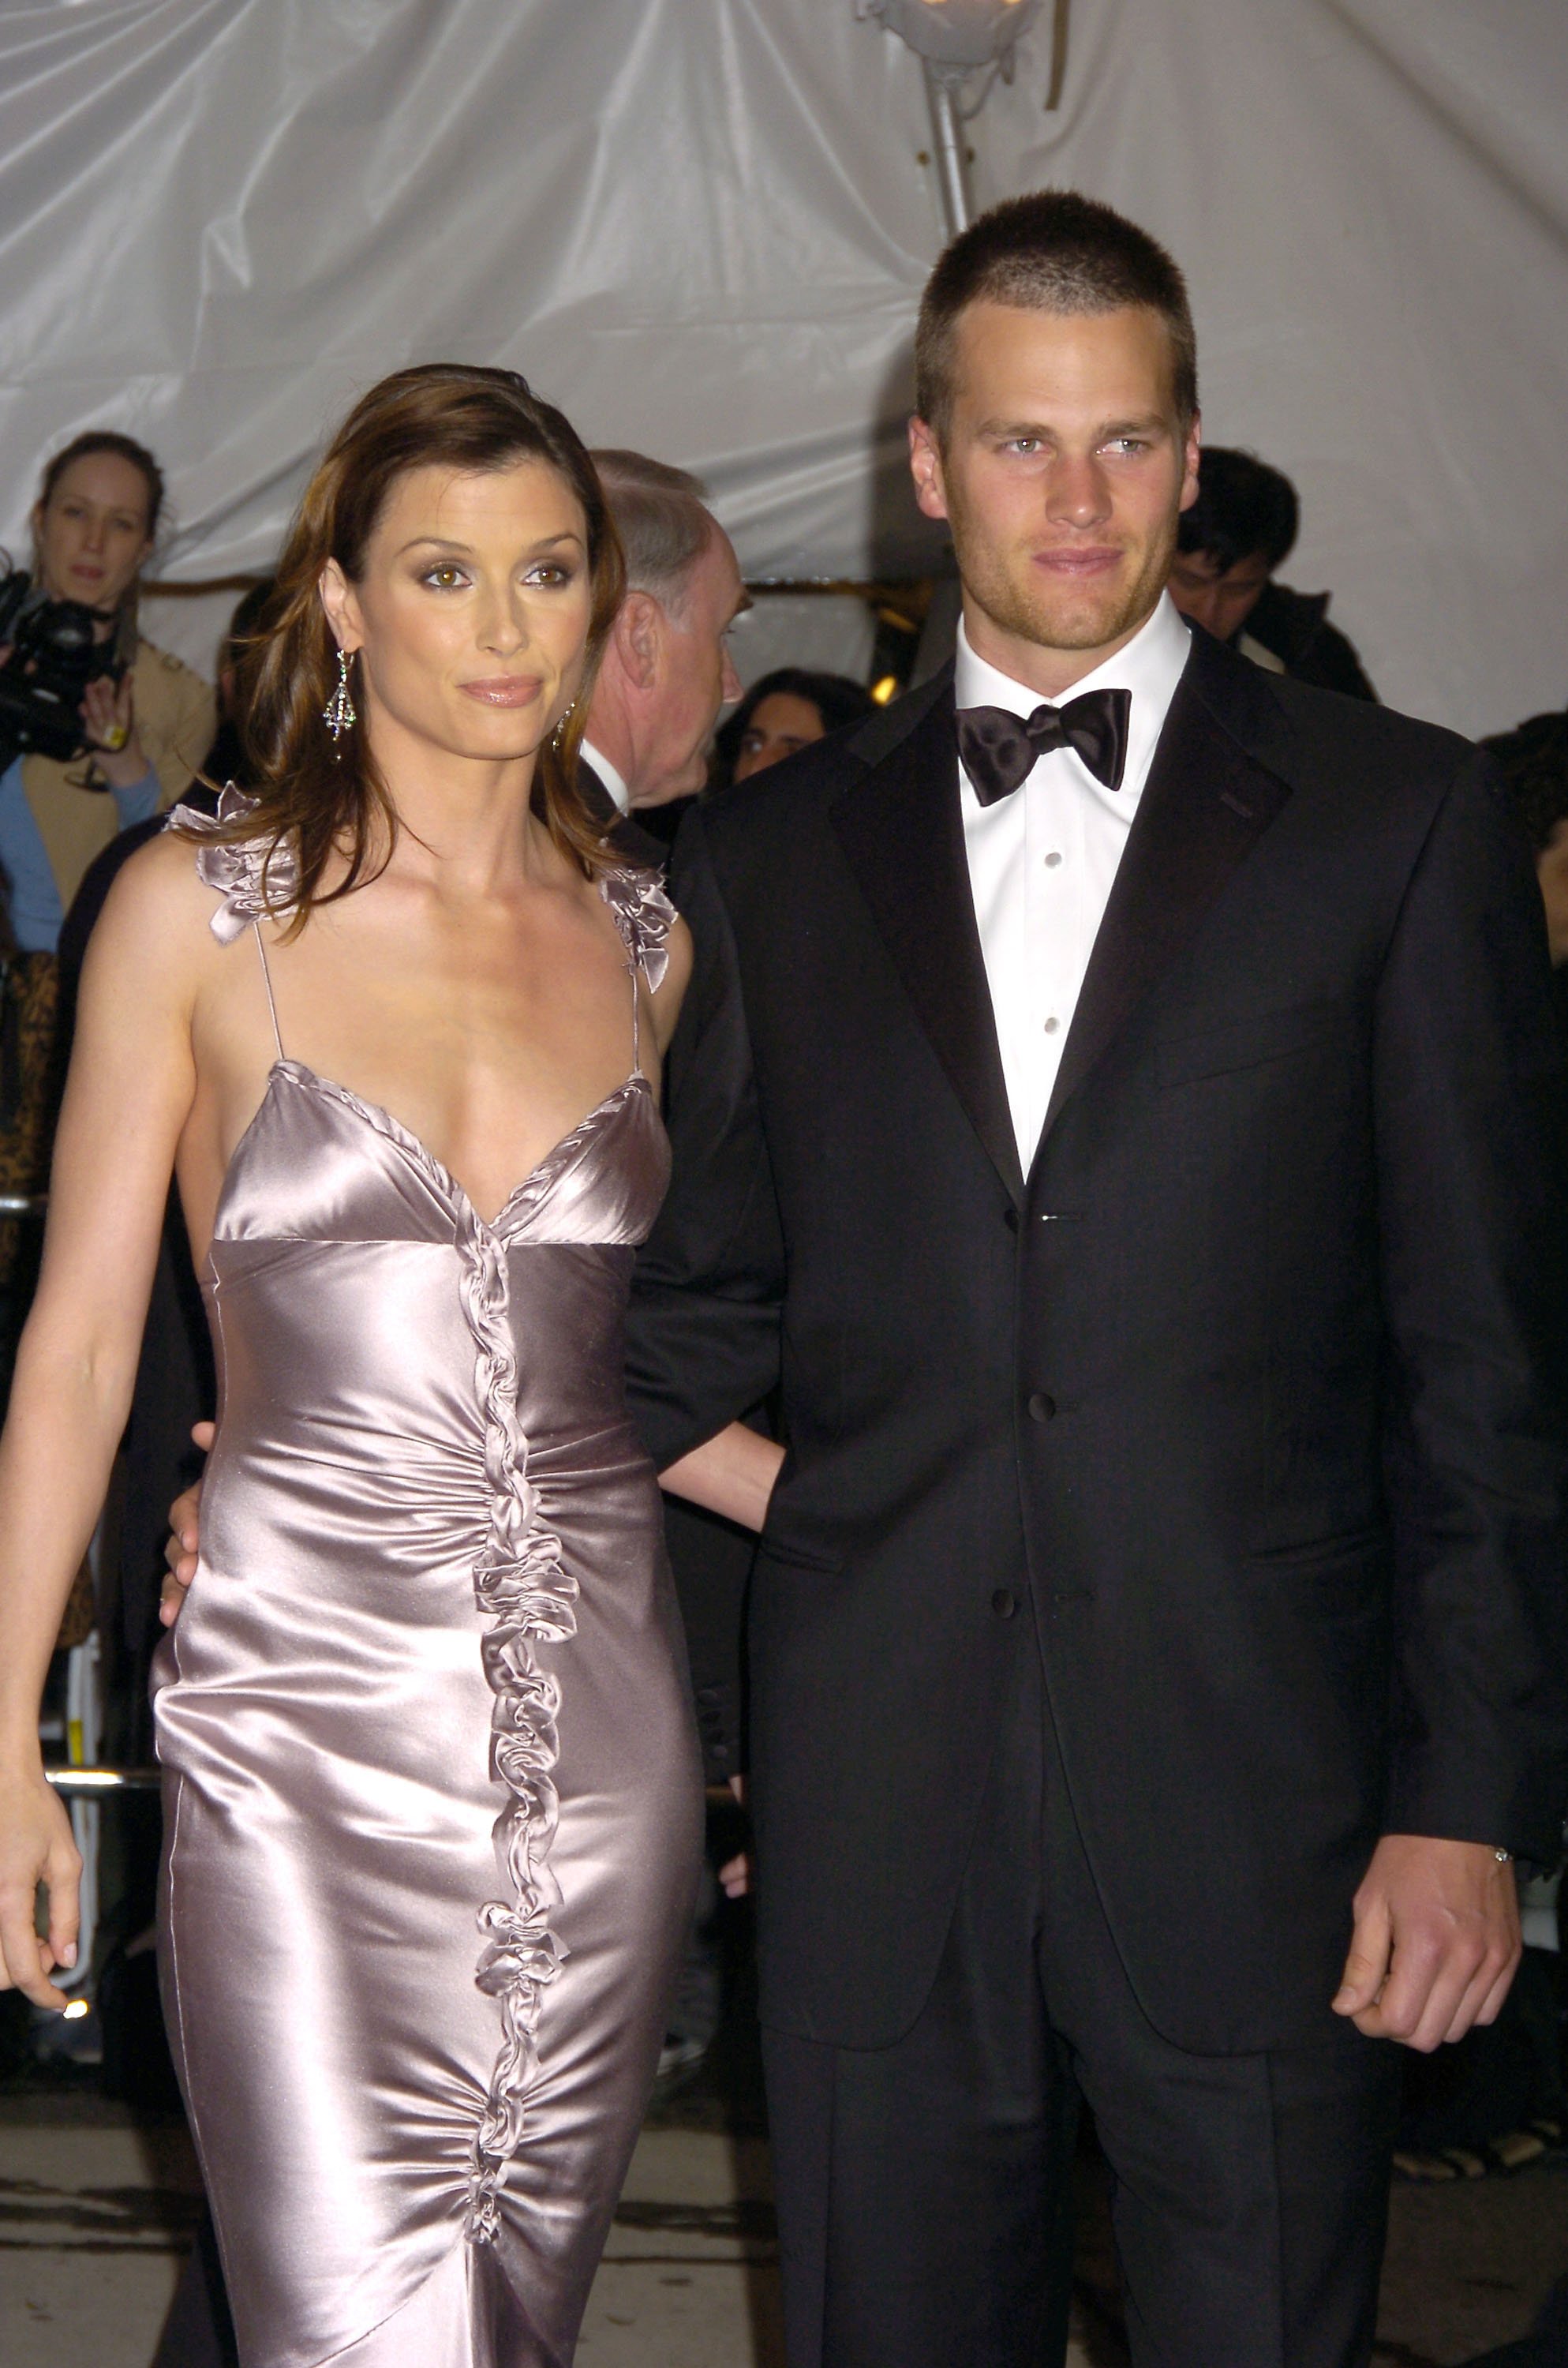 Bridget Moynahan and Tom Brady during The Costume Institute's Gala Celebrating "Chanel" at The Metropolitan Museum of Art in New York City, New York, United States. | Source: Getty Images